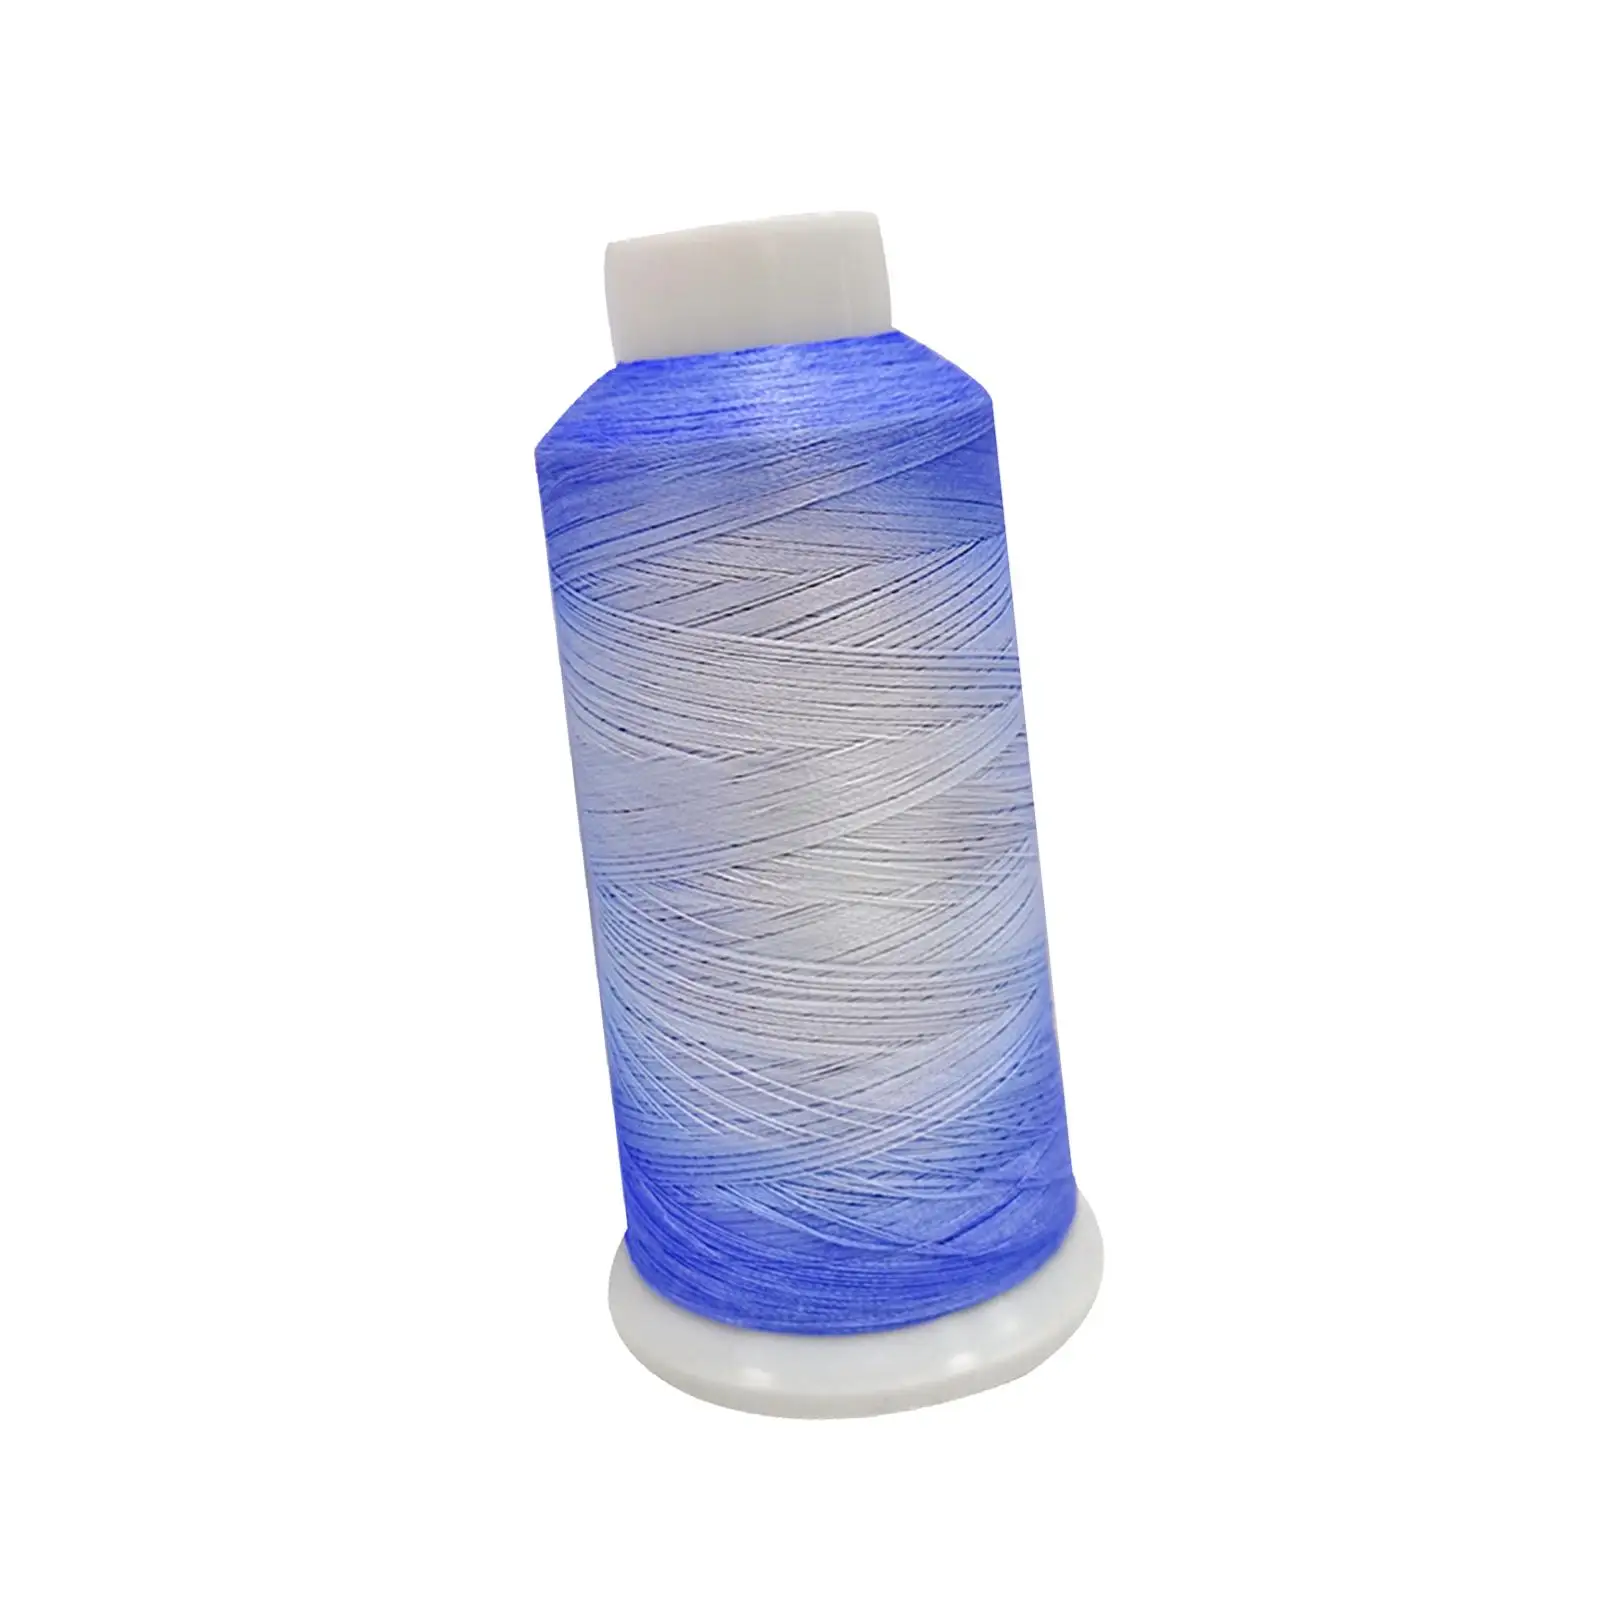 Colorful Color Changing Thread Embroidery Sewing Thread Hand Knitting Polyester Supplies for Festivals Crochet Sewing Shawl Hat